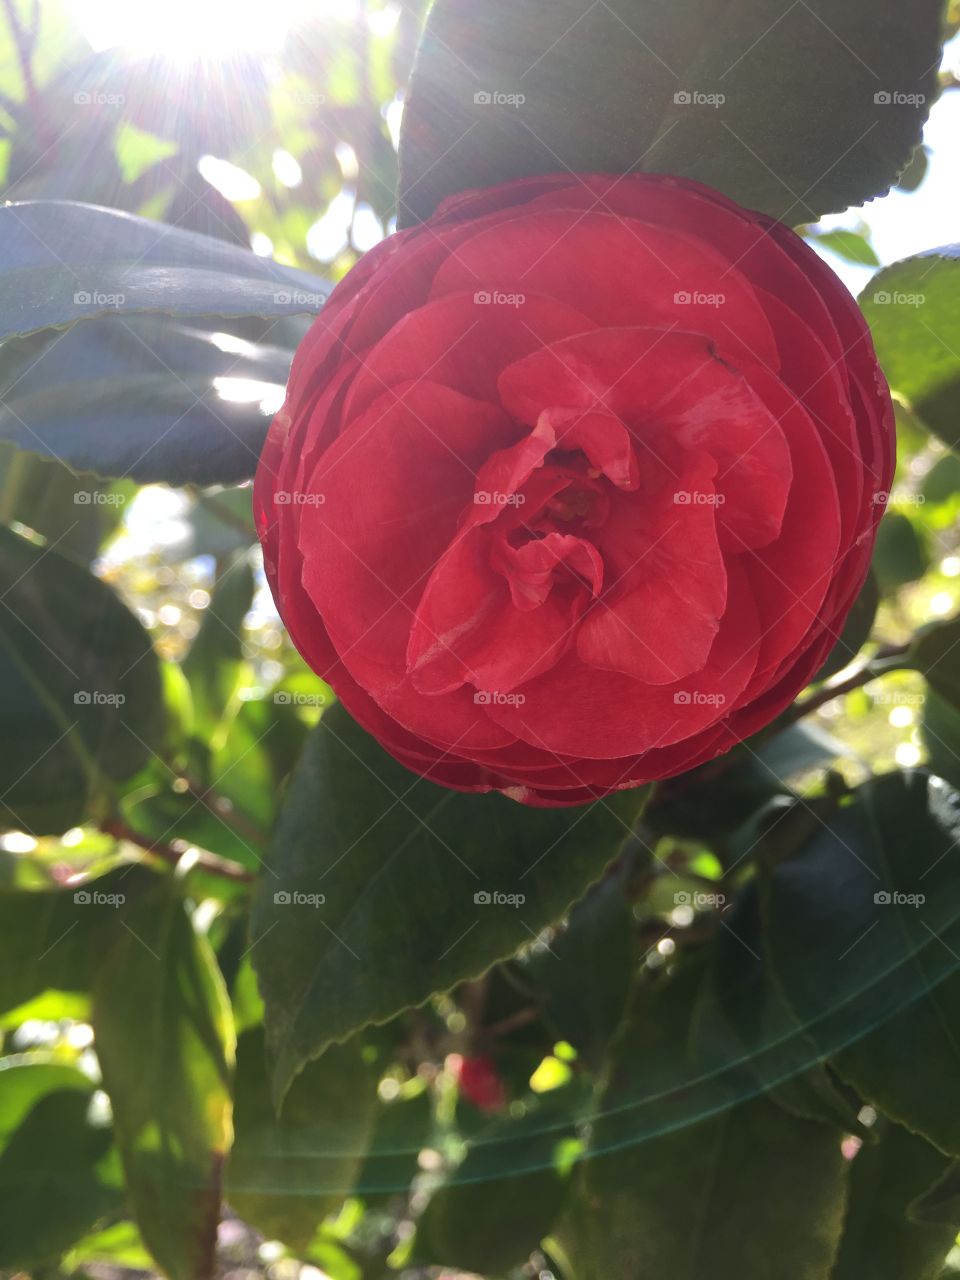 A red flower saying good morning to the people who live in LA.